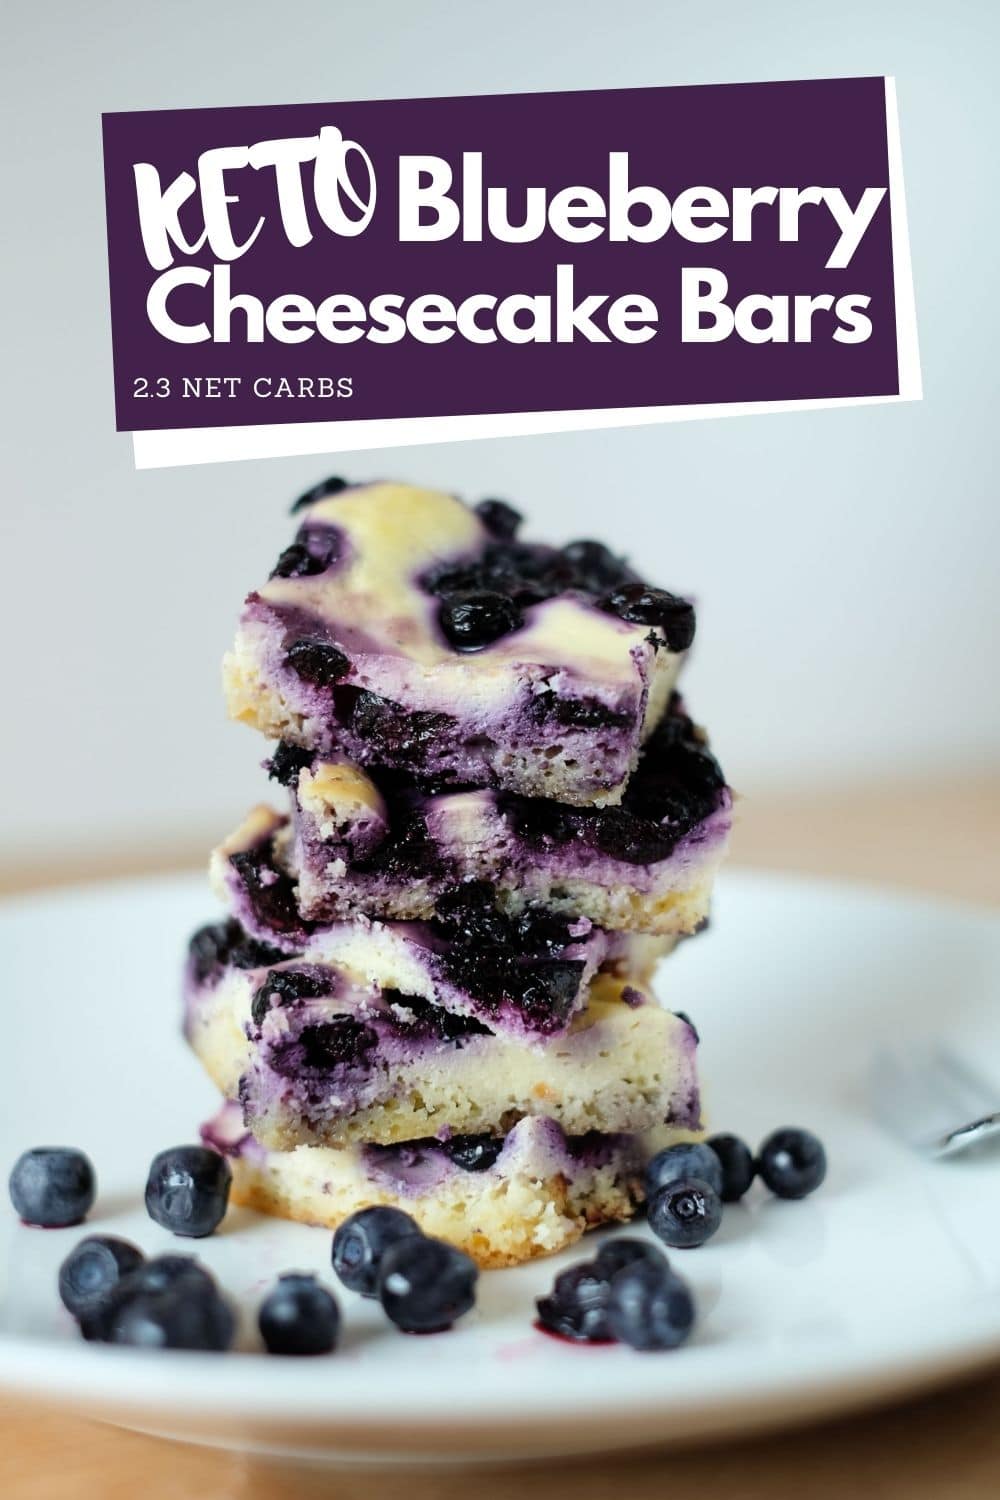 The recipe for delicious keto blueberry cheesecake bars is ridiculously simple to make, more so if you can get hold of fresh berries.